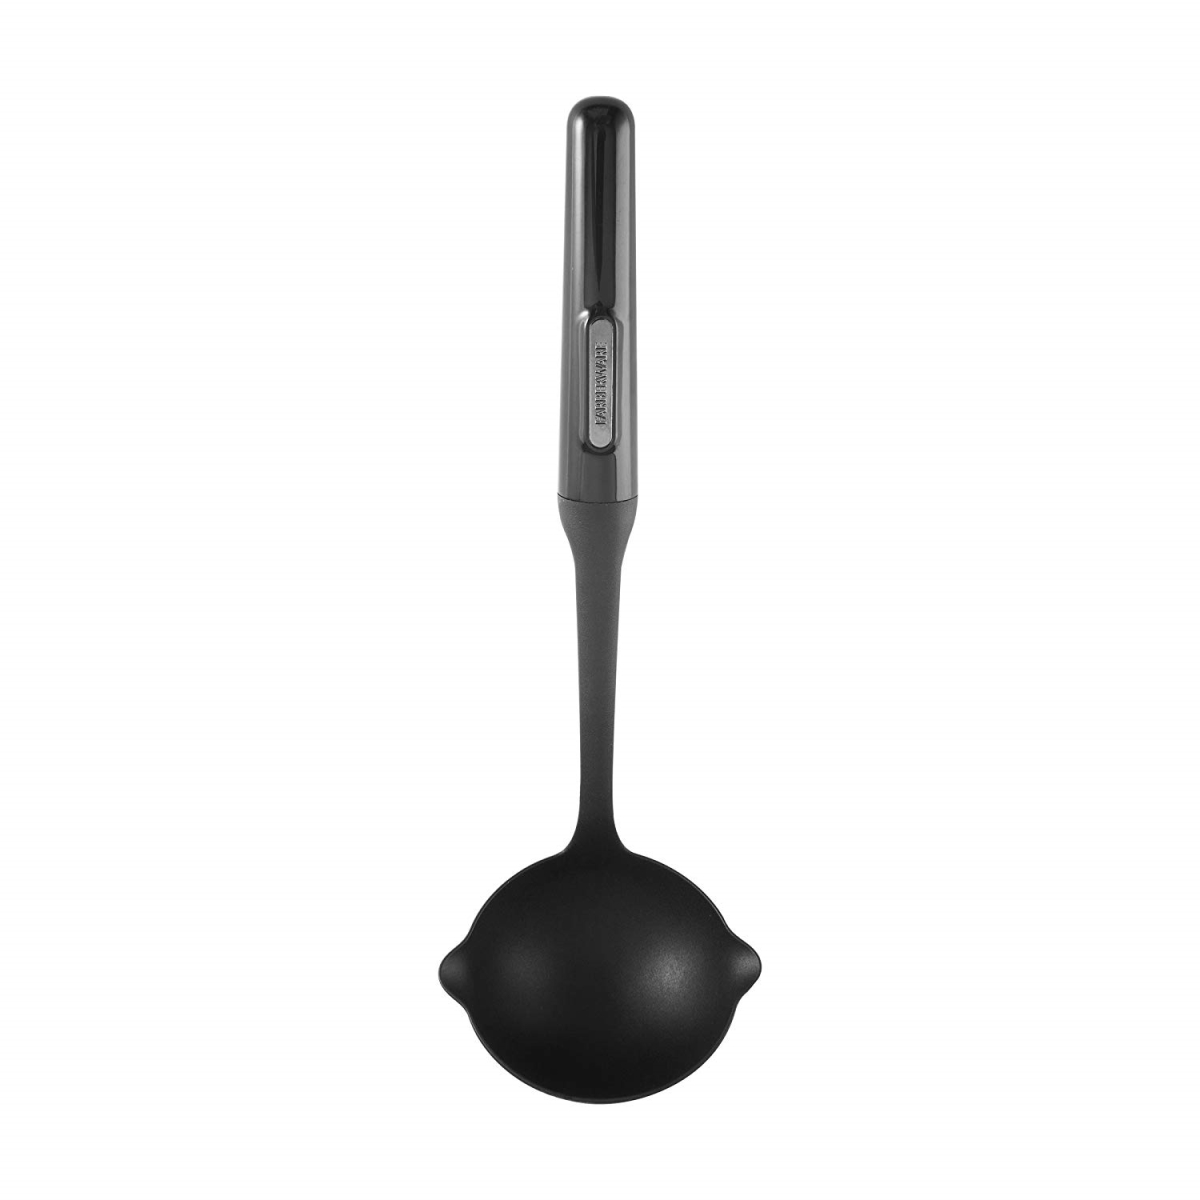 Picture of Lifetm 5211448 BLK Professional Soup Ladle-Safe for Non-Stick Cookware, Black - Pack of 3